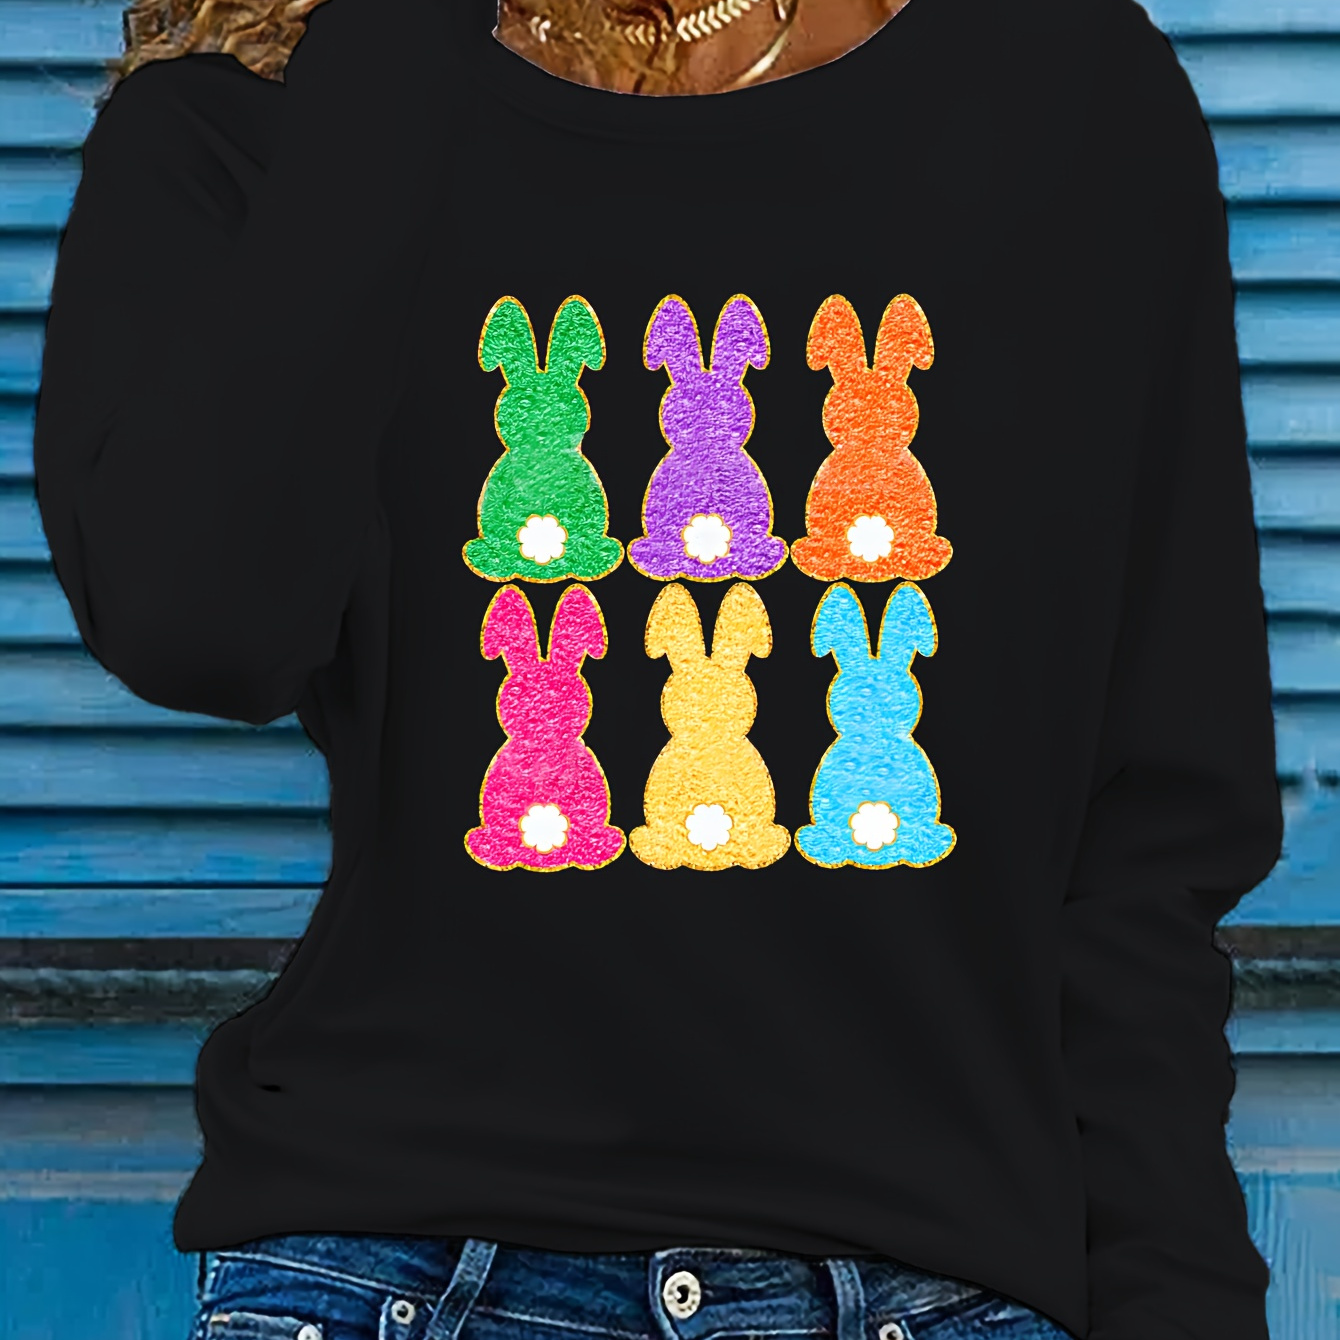 

Easter Graphic Print T-shirt, Long Sleeve Crew Neck Casual Top For Spring & Fall, Women's Clothing